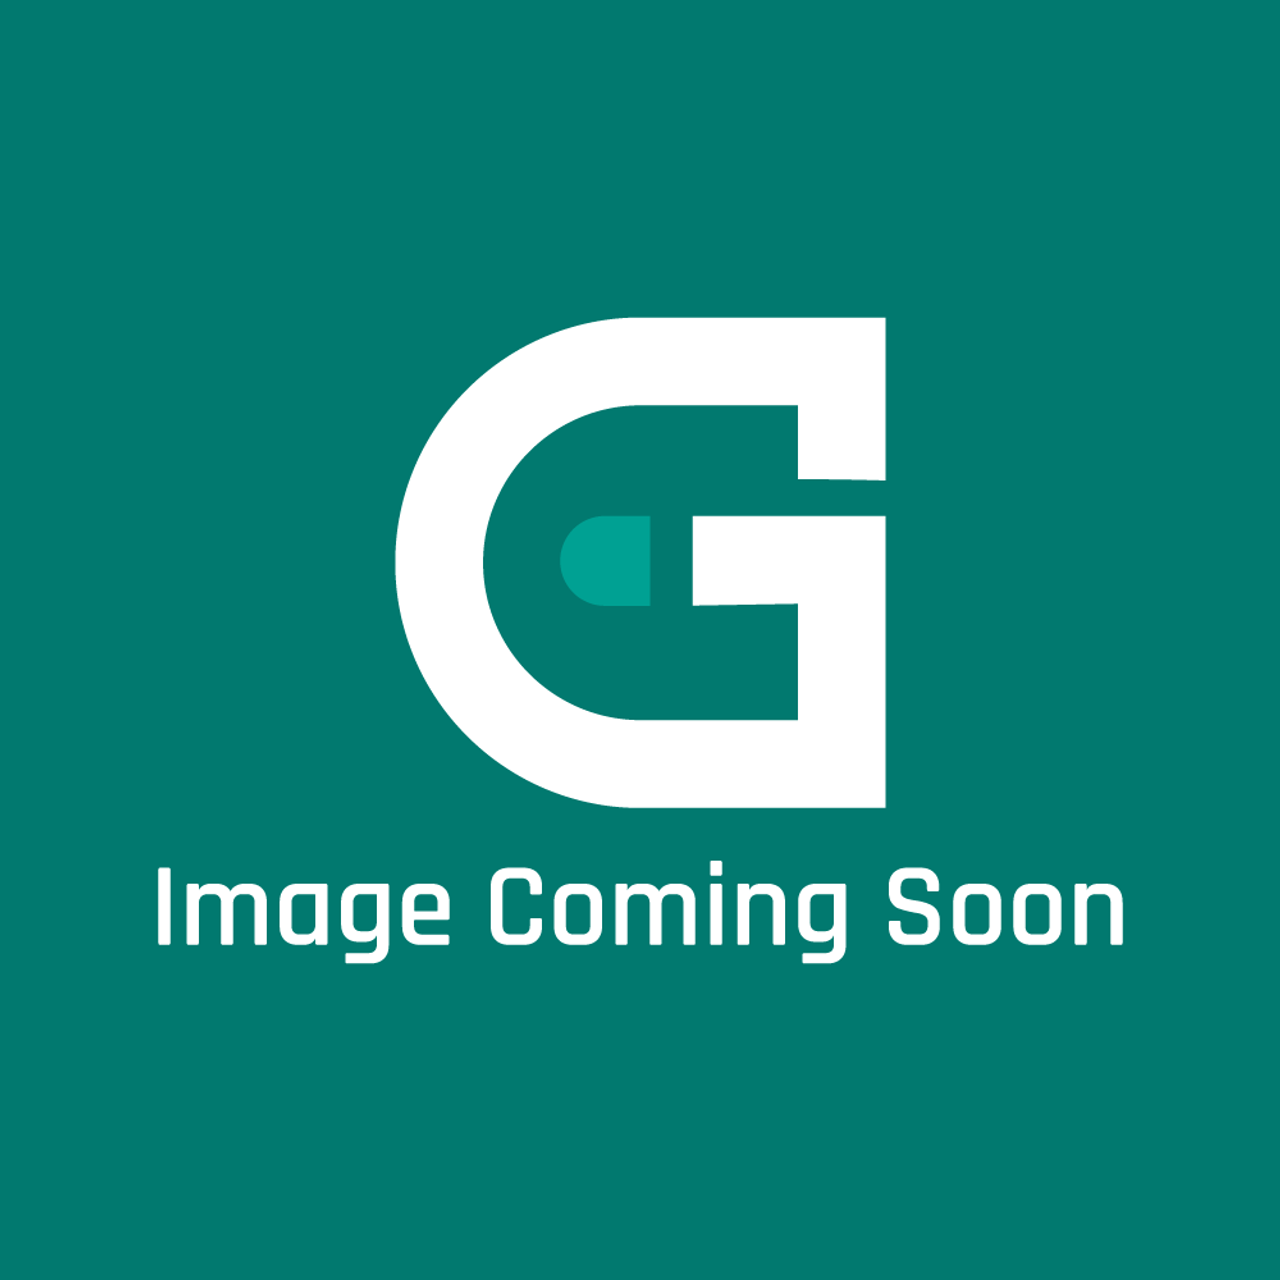 AGA Marvel 42246933 - S/A-6.1 Baseplate (42416839) - Image Coming Soon!